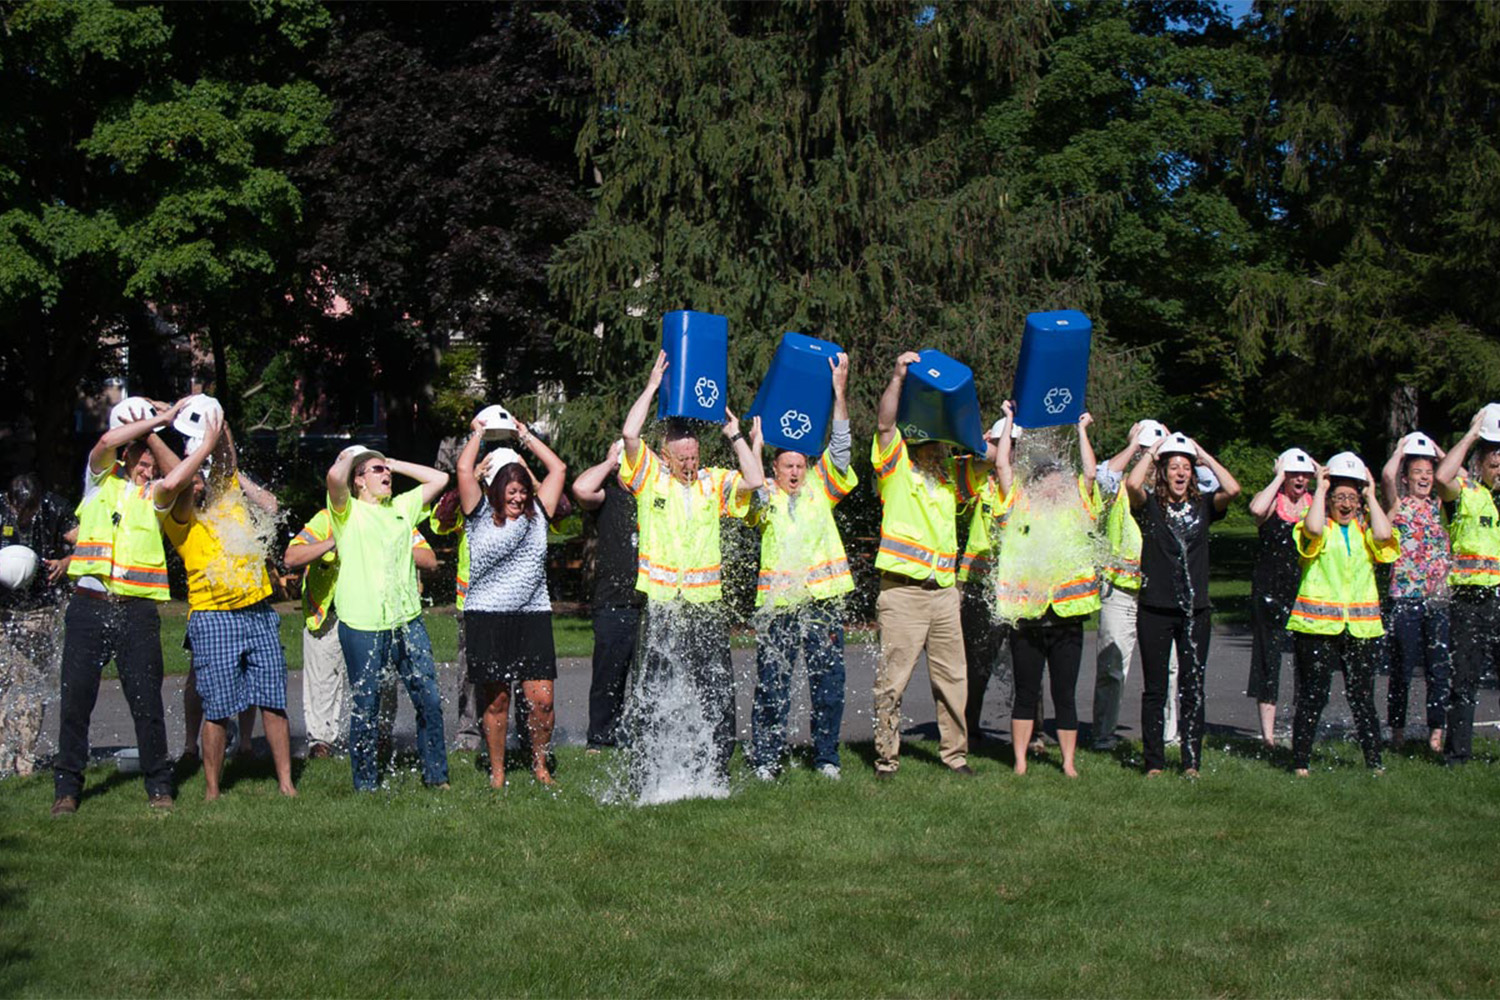 Completing the ice bucket challenge in support of ALS